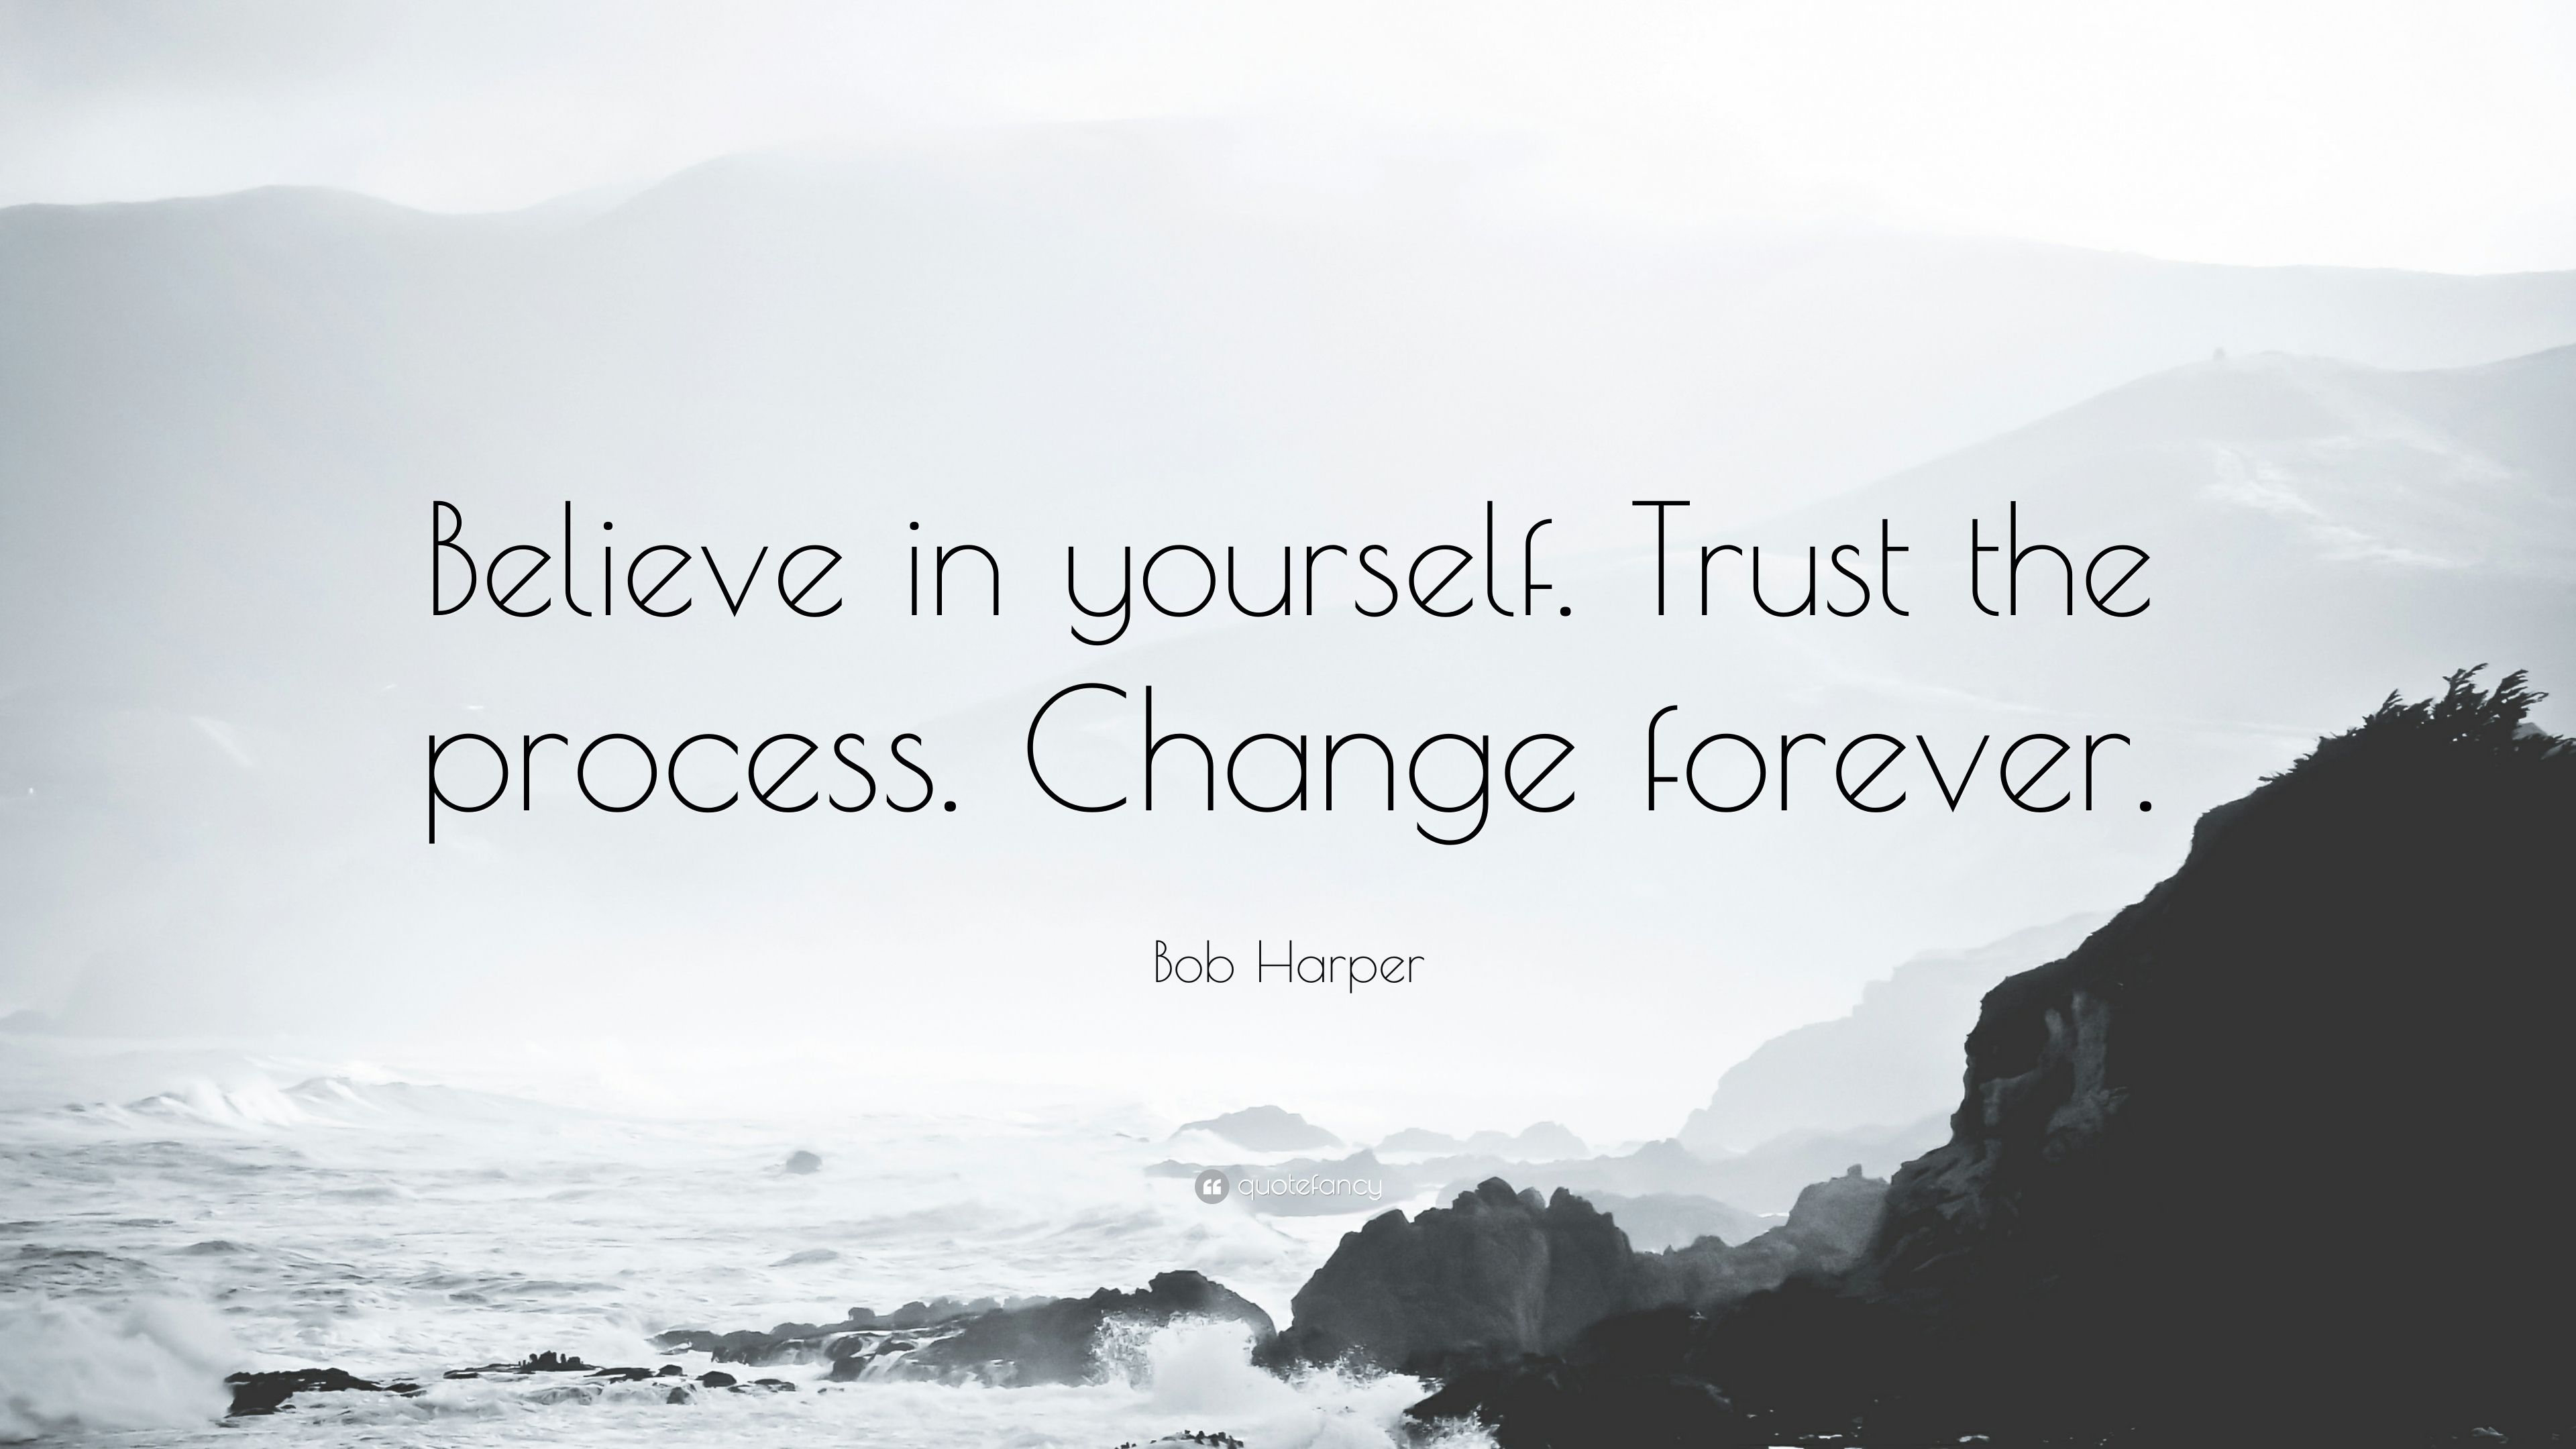 Bob Harper Quote: “Believe in yourself. Trust the process. Change forever.” (12 wallpaper)